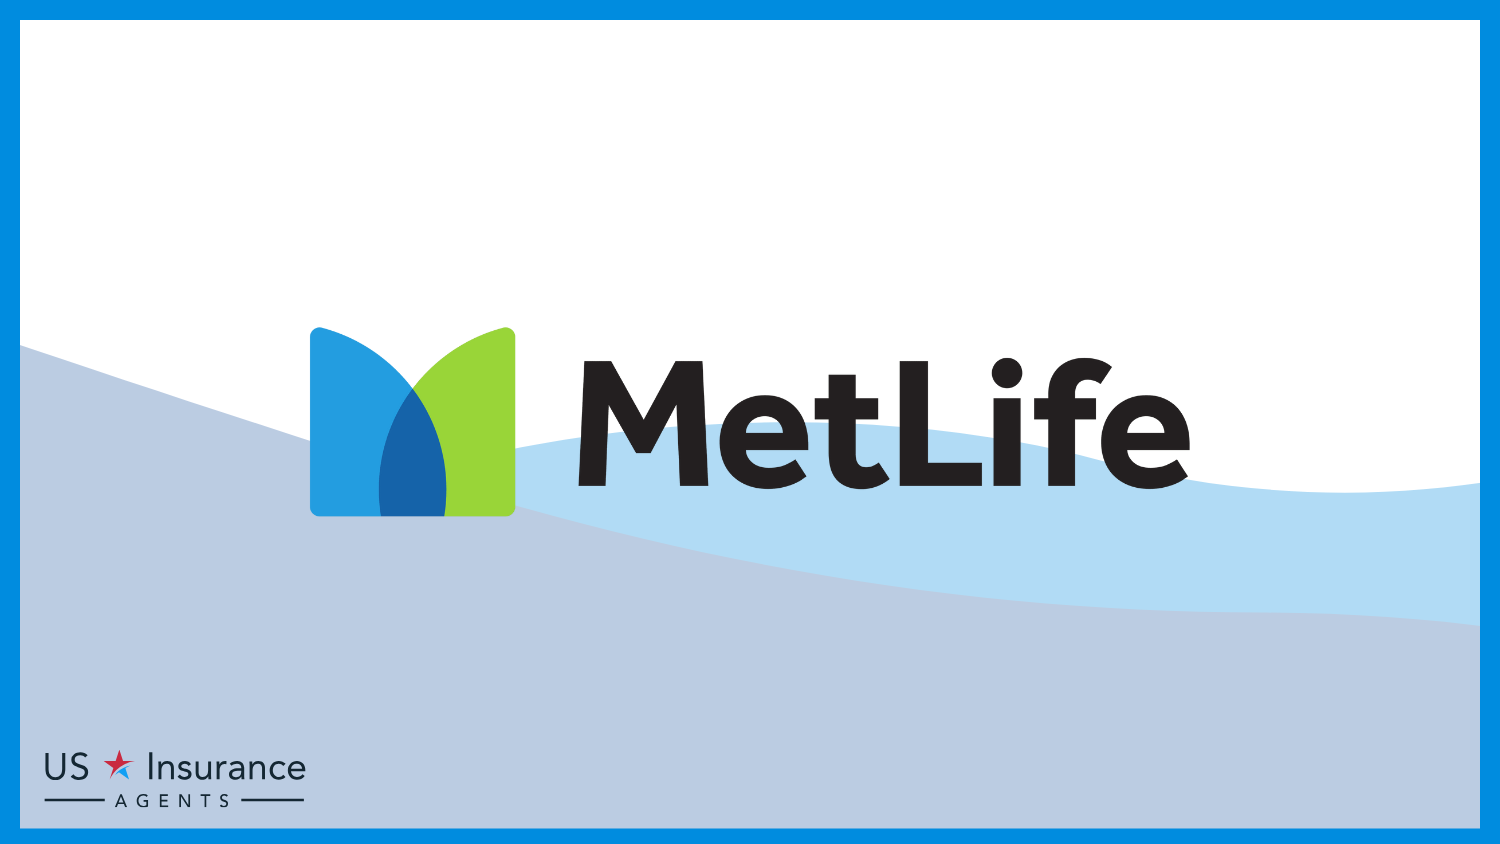 MetLife: Best Life Insurance for Overweight People